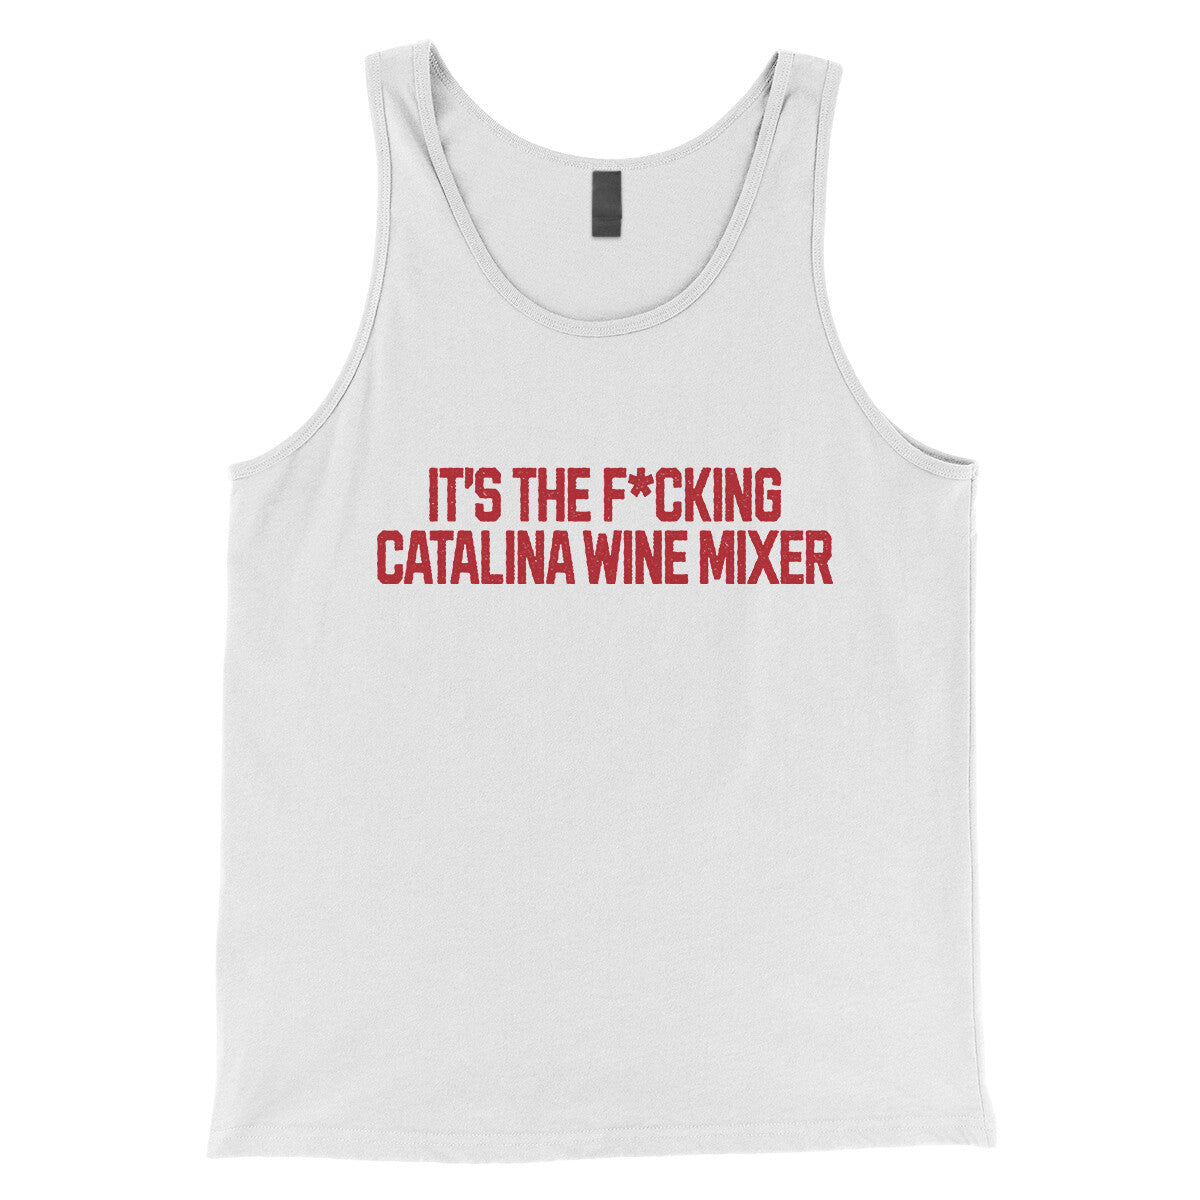 It's the Fucking Catalina Wine Mixer in White Color